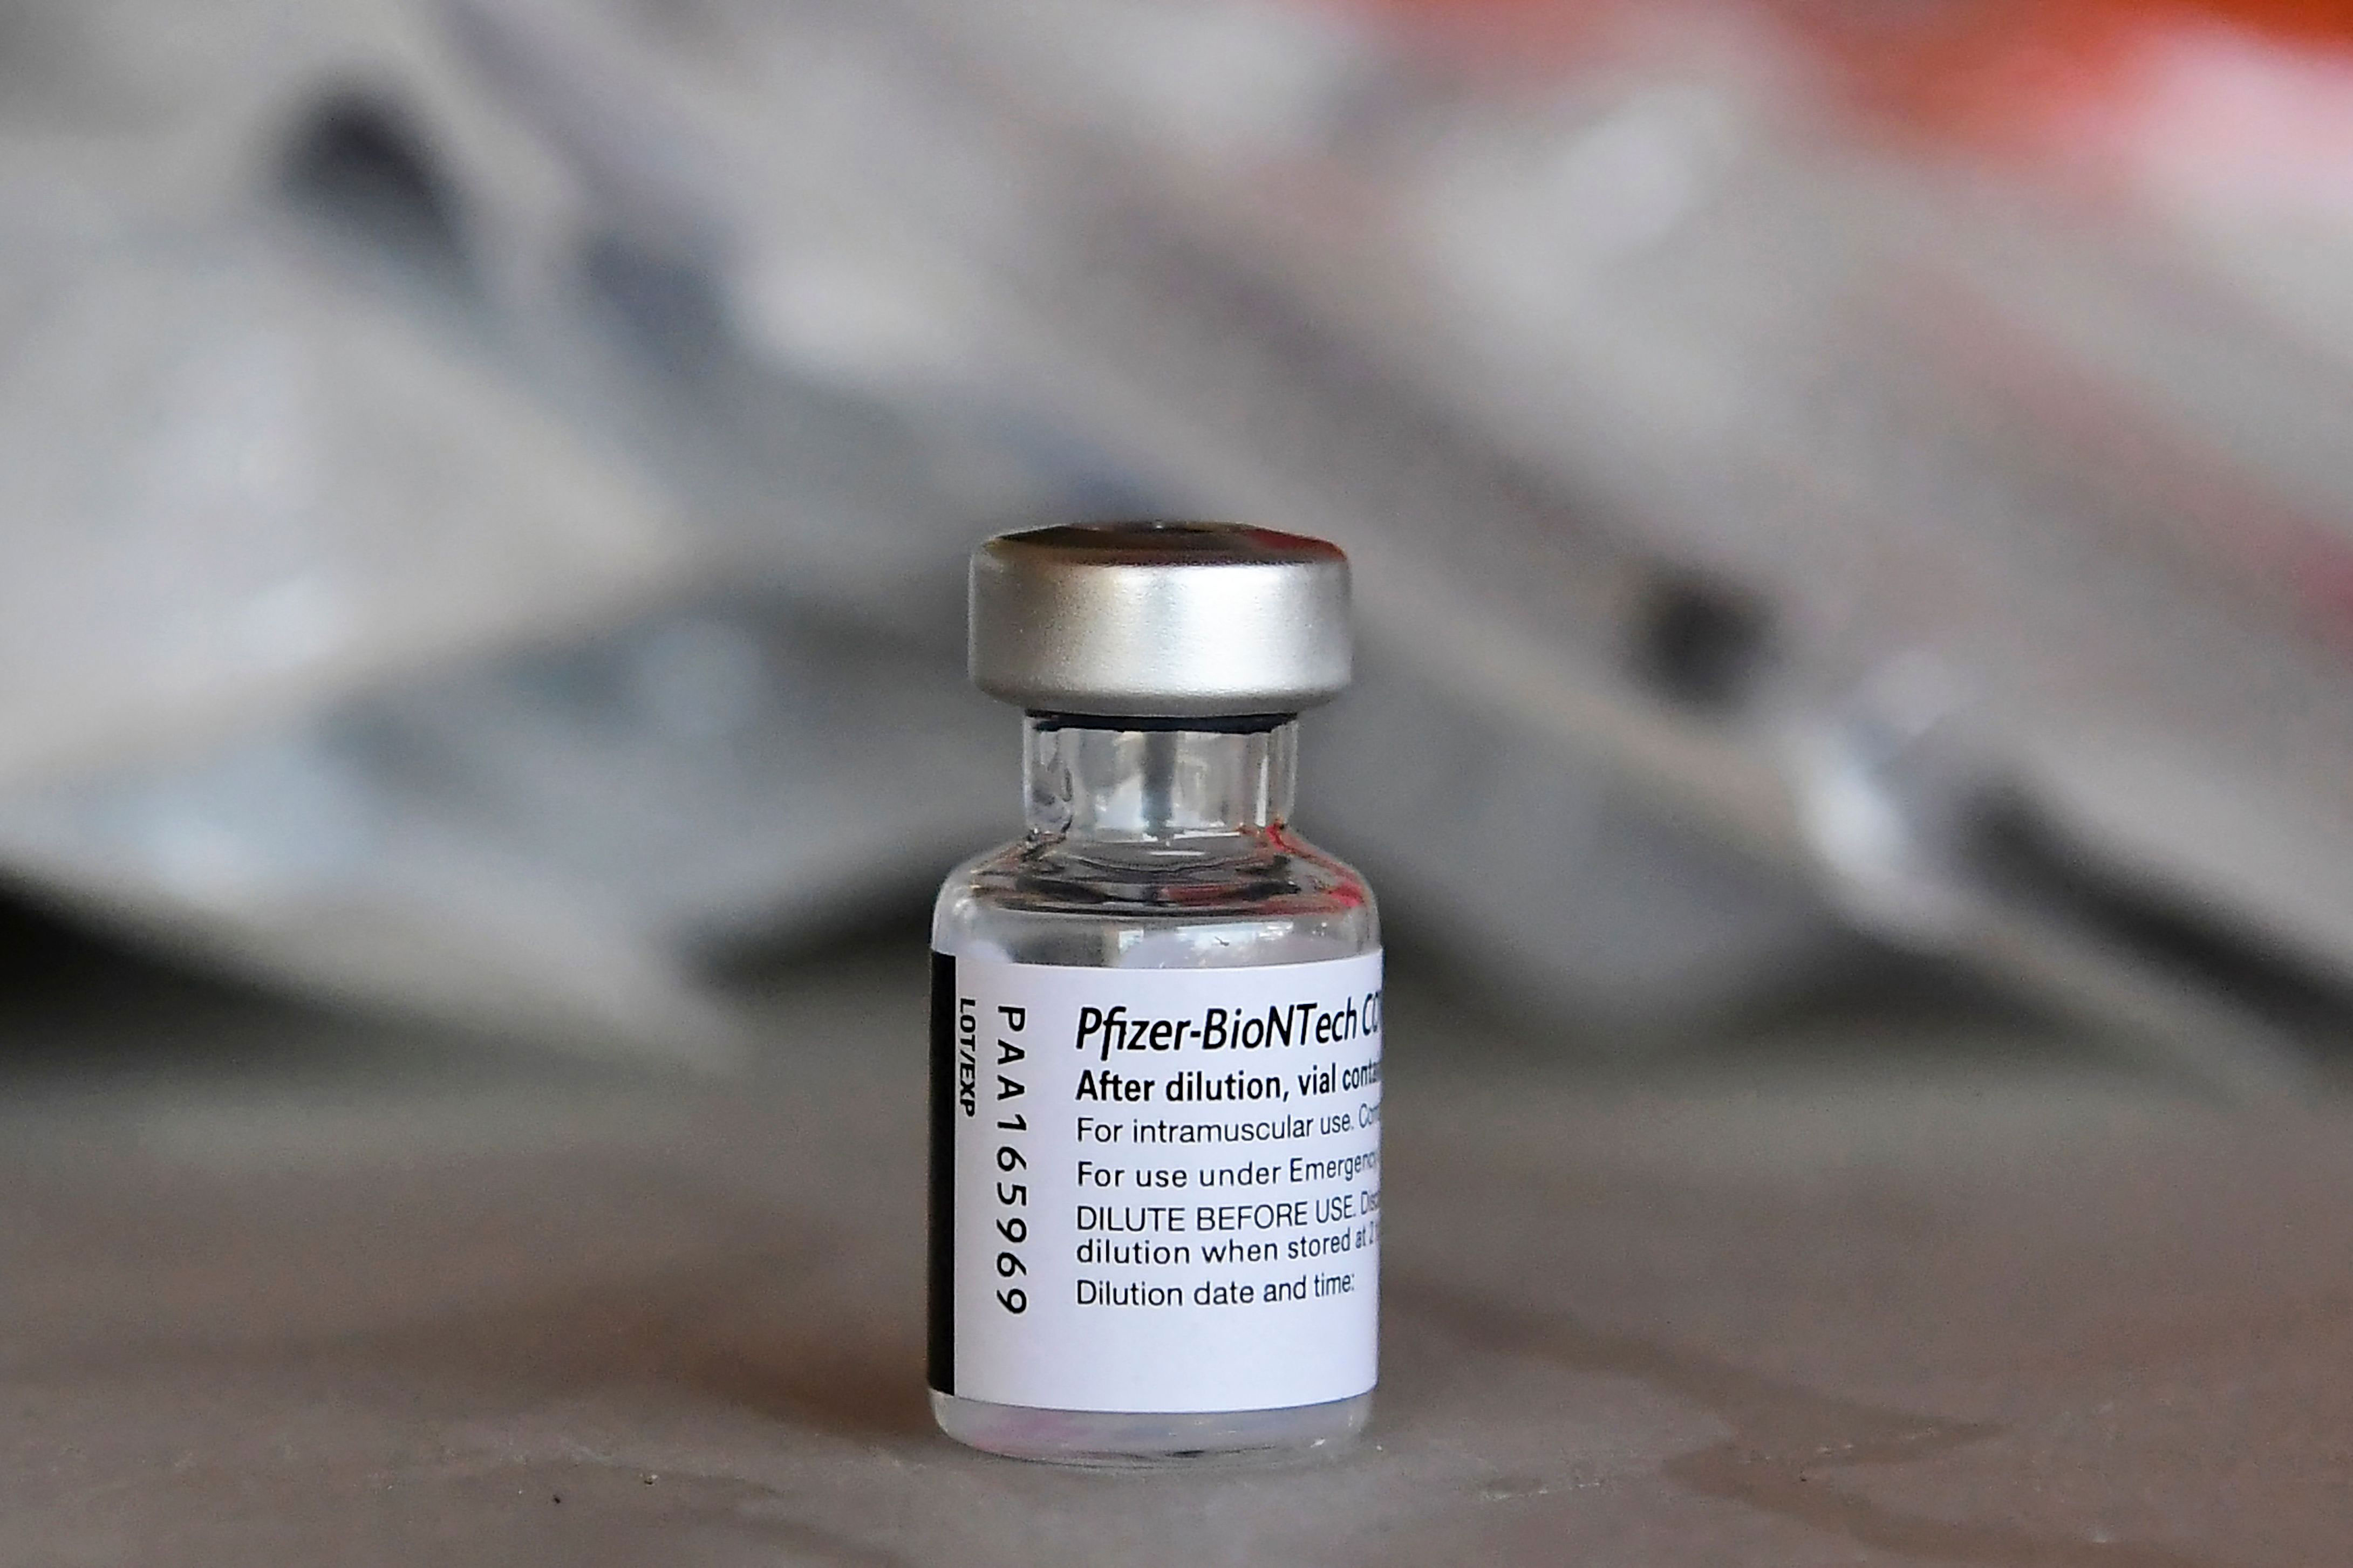 A Pfizer Covid-19 vaccine vial is pictured at a mobile clinic in Los Angeles on July 9, 2021.